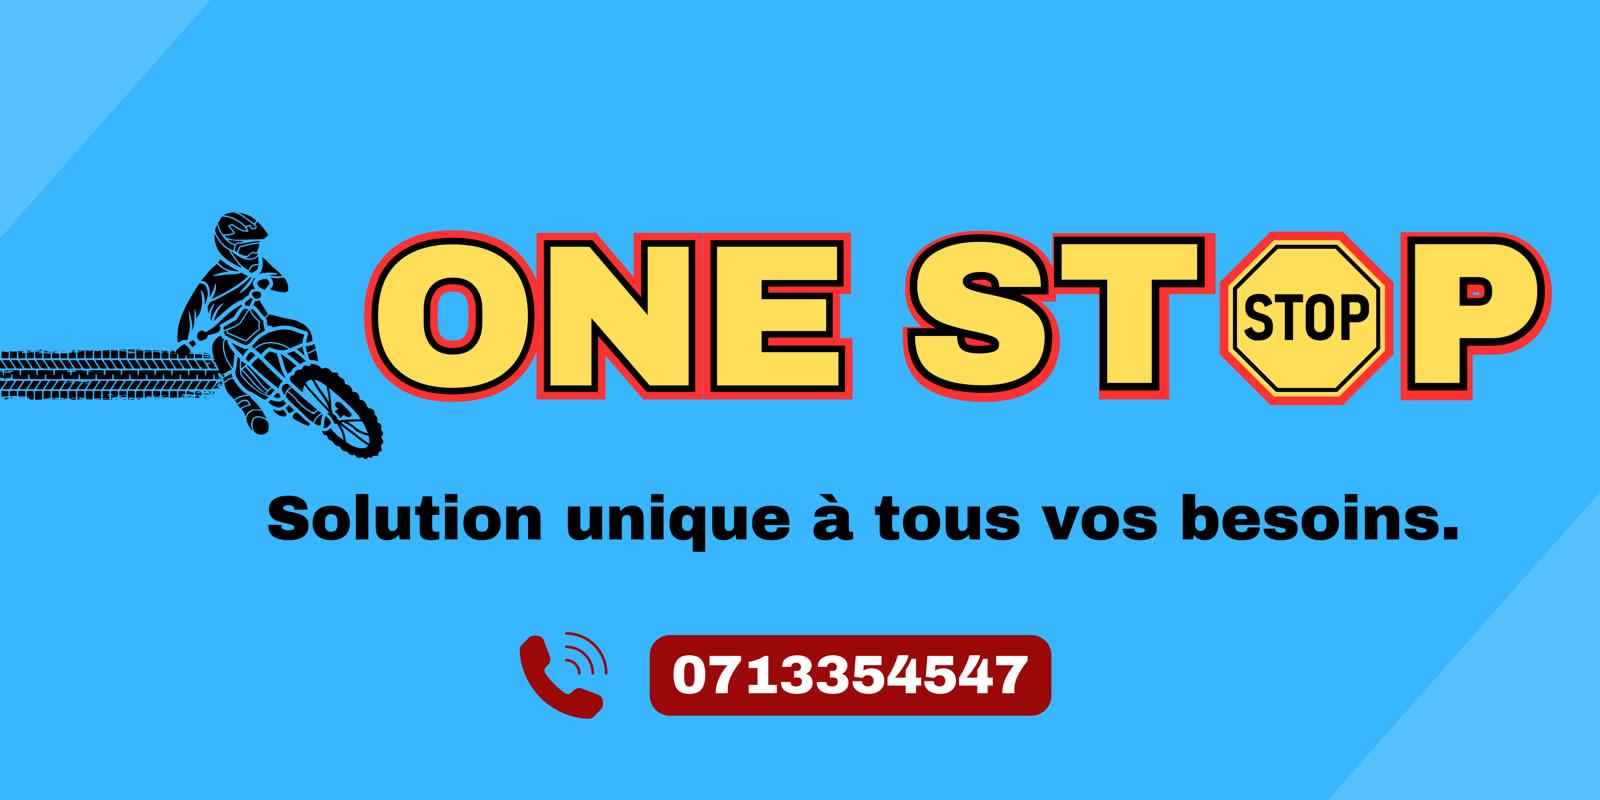 ONE STOP